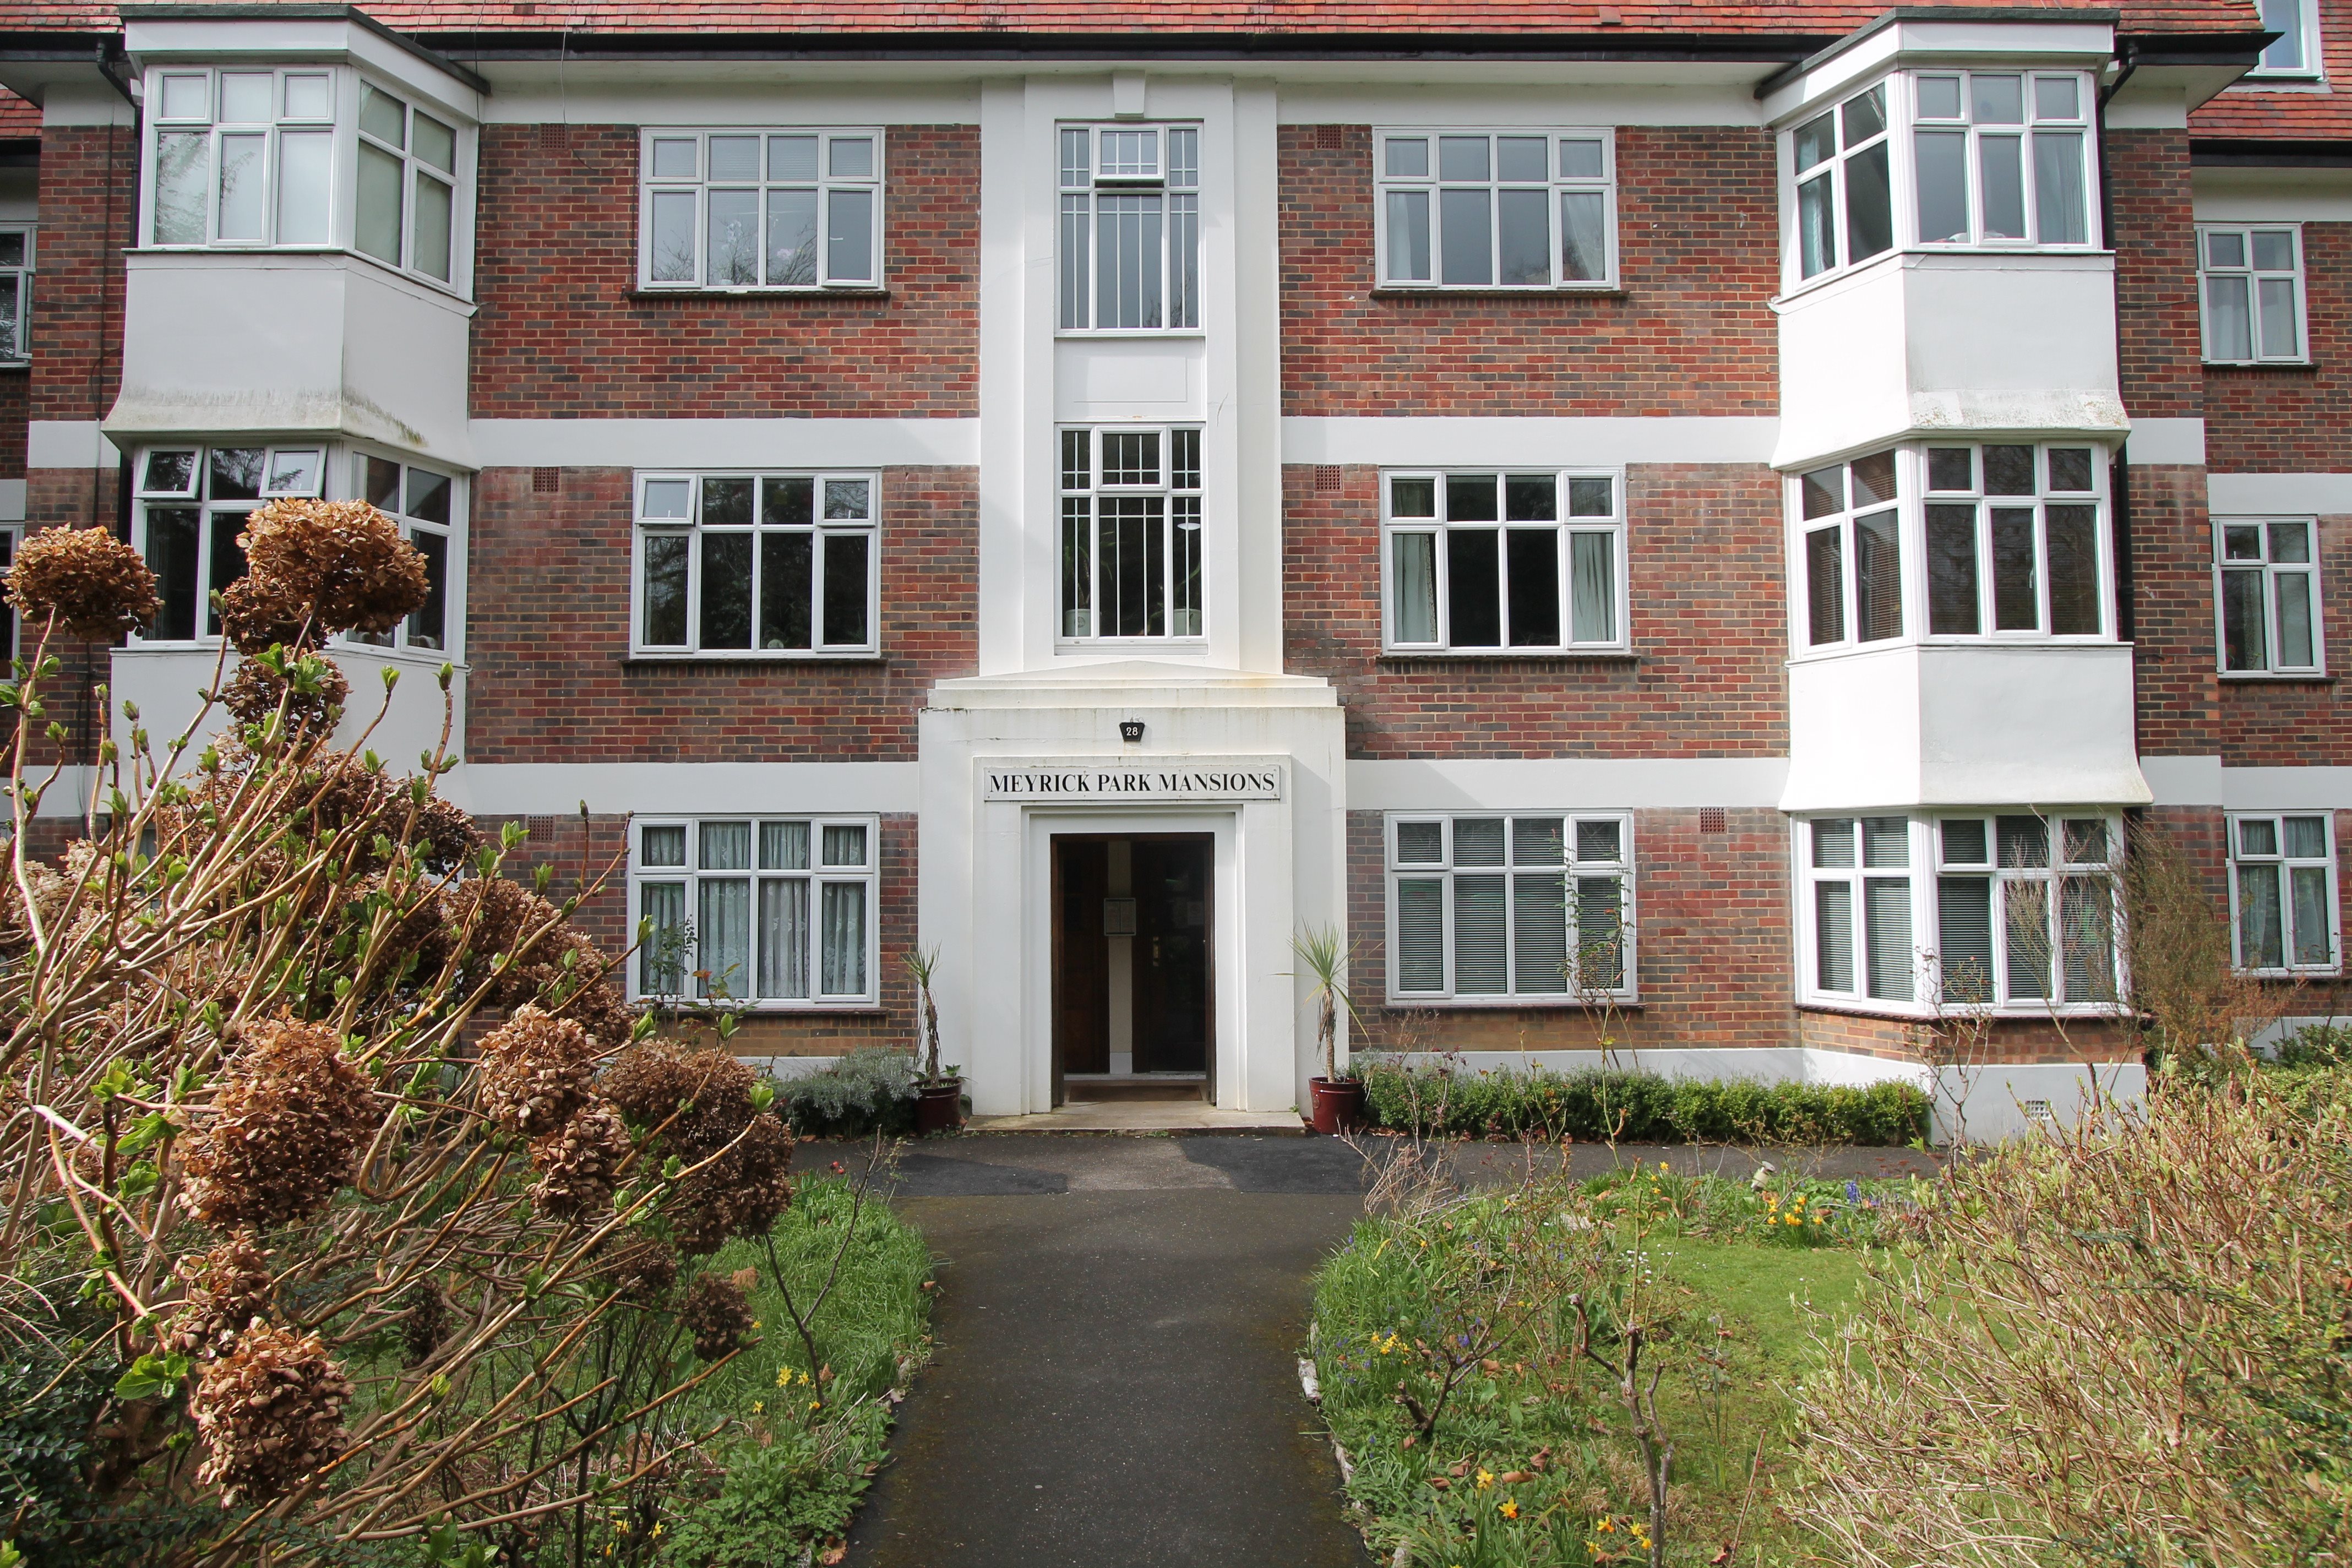 Christopher Shaw Residential are pleased to present this lovely first floor one bedroom apartment, which is ideally in Meyrick Park. It's a great property which must be seen! Currently rented at £800pcm.